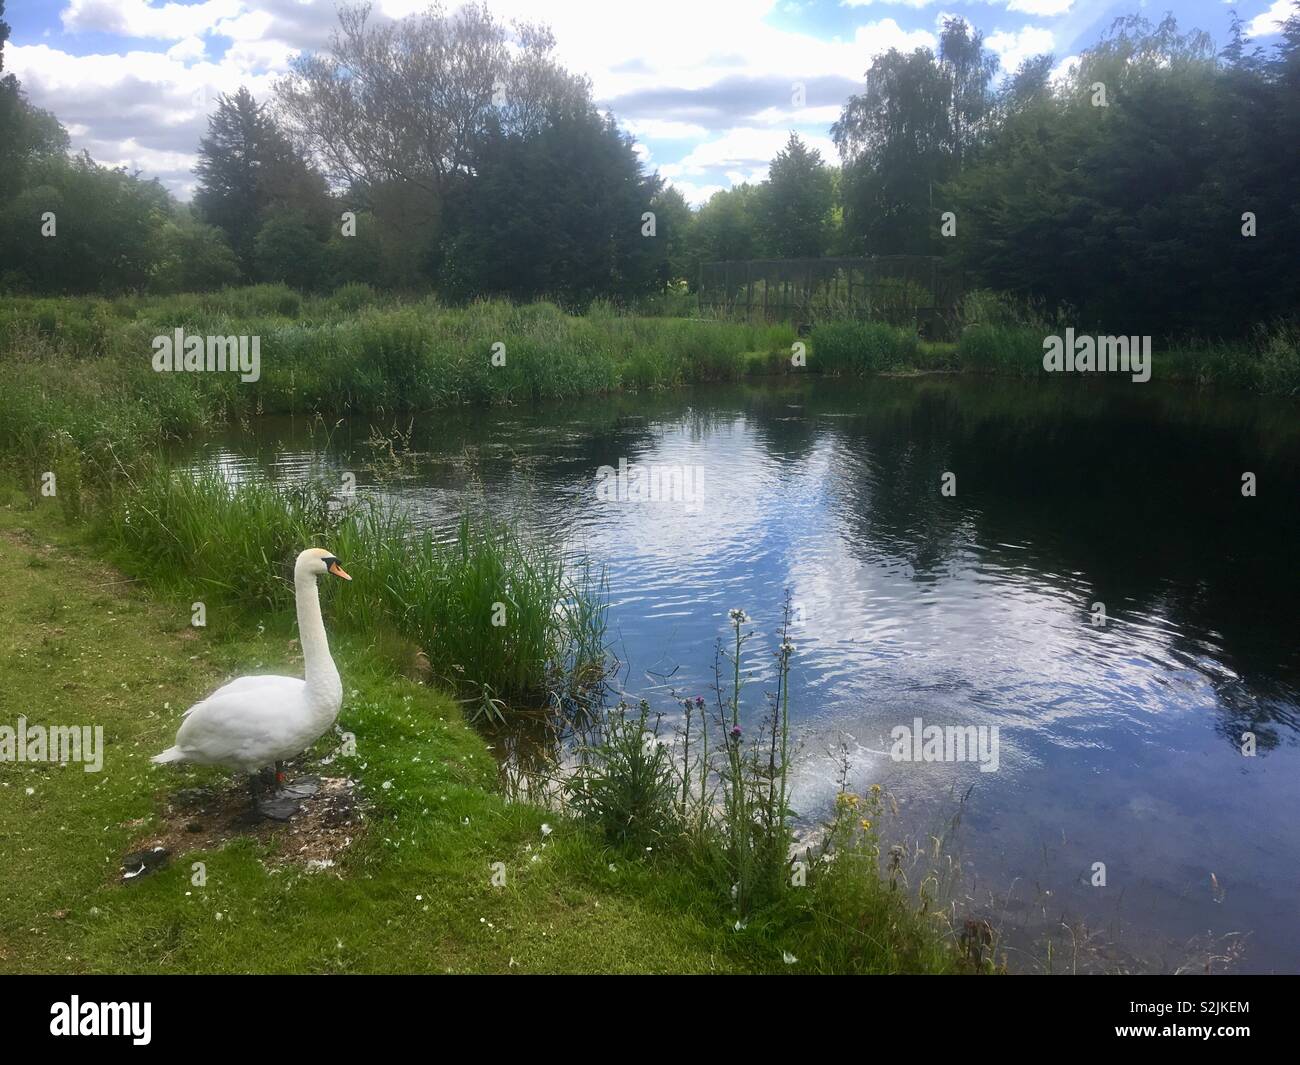 Swan on the bank of the Mimram River in the grounds of Tewin Bury Farm, Hertfordshire Stock Photo